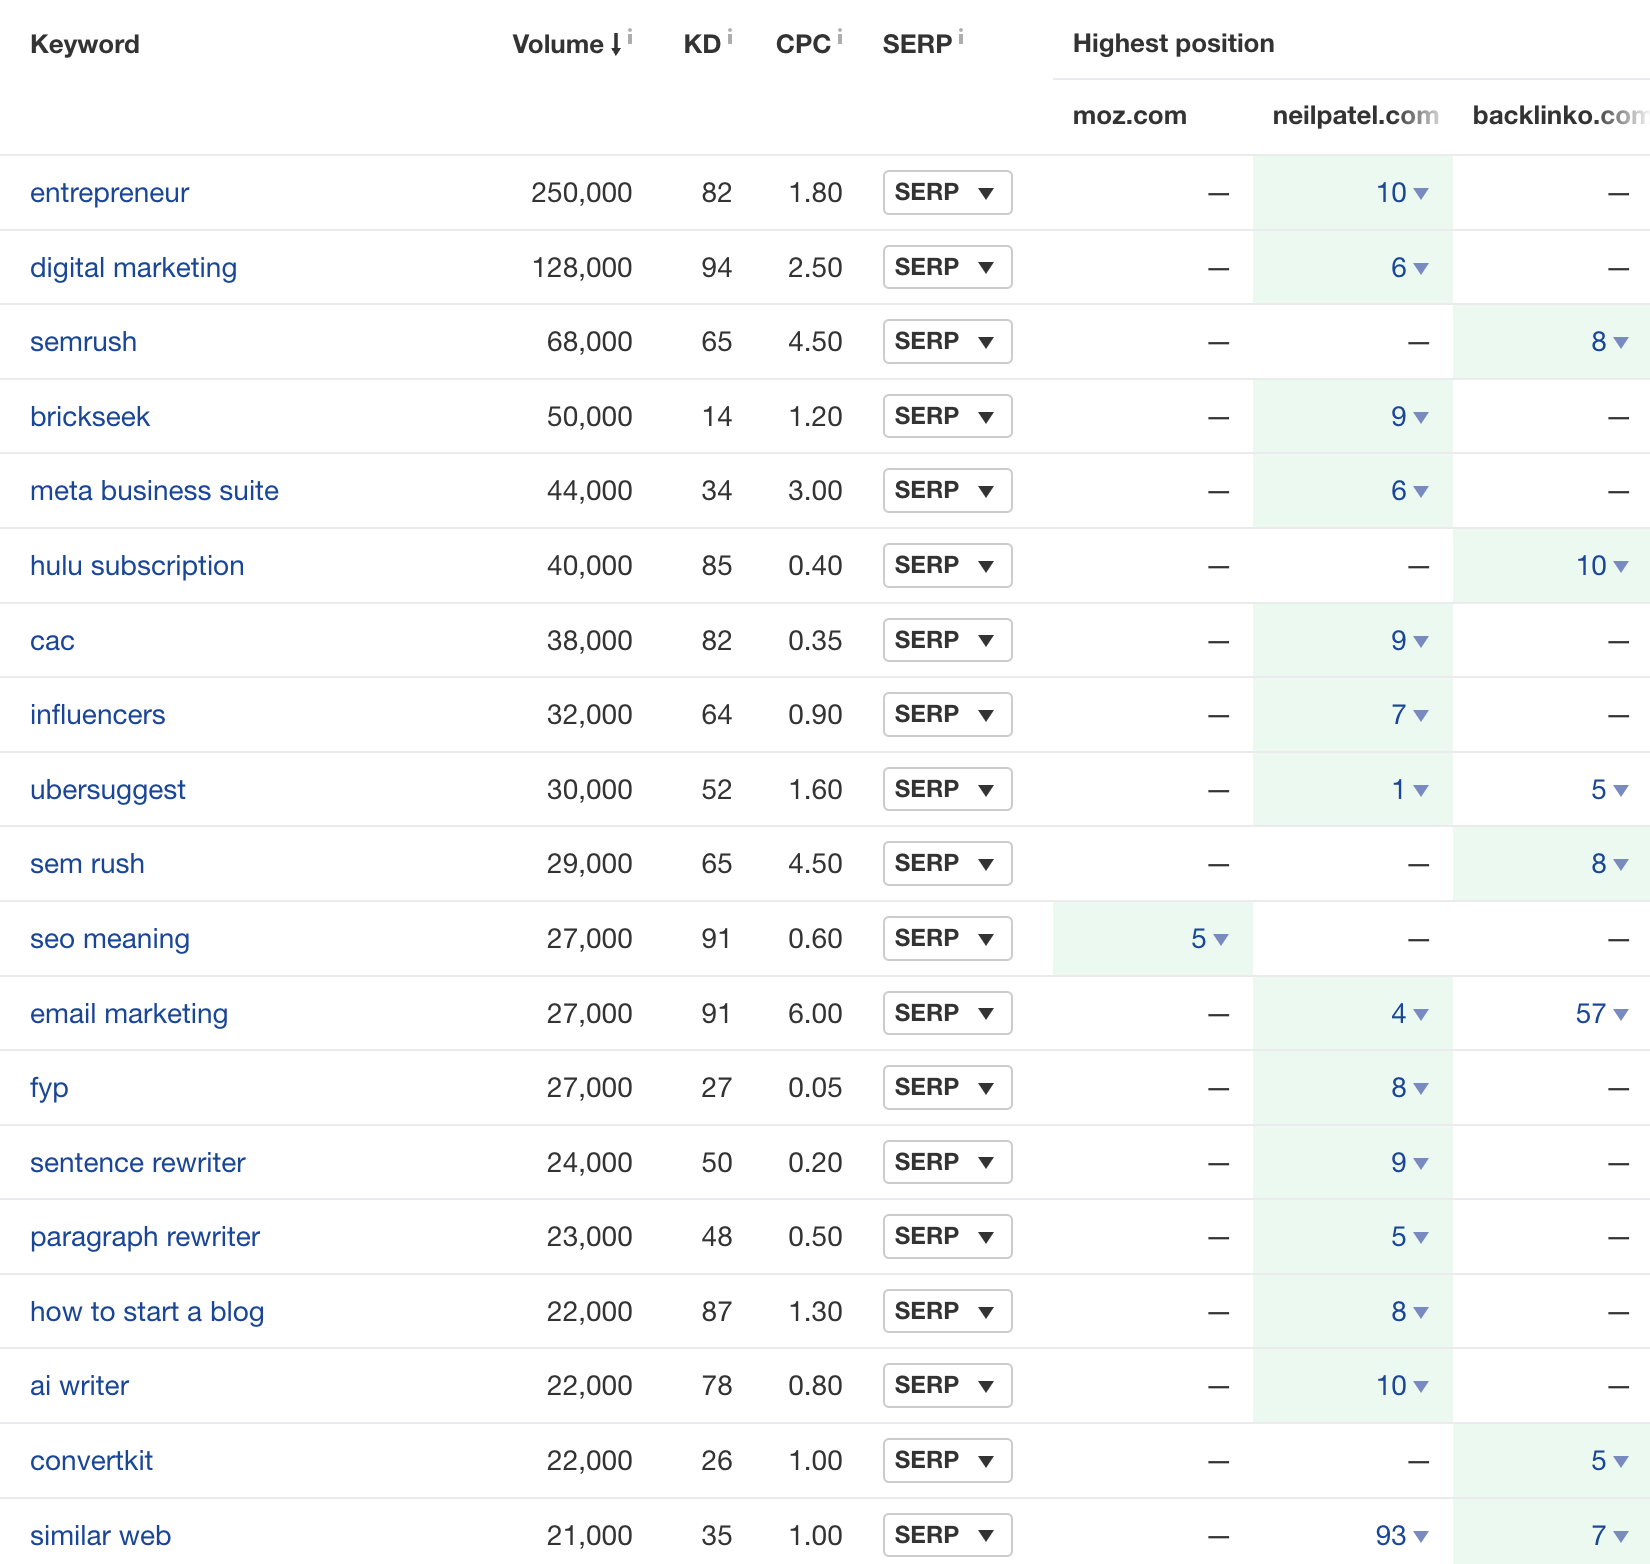 Results of a content gap analysis in Ahrefs' Site Explorer
